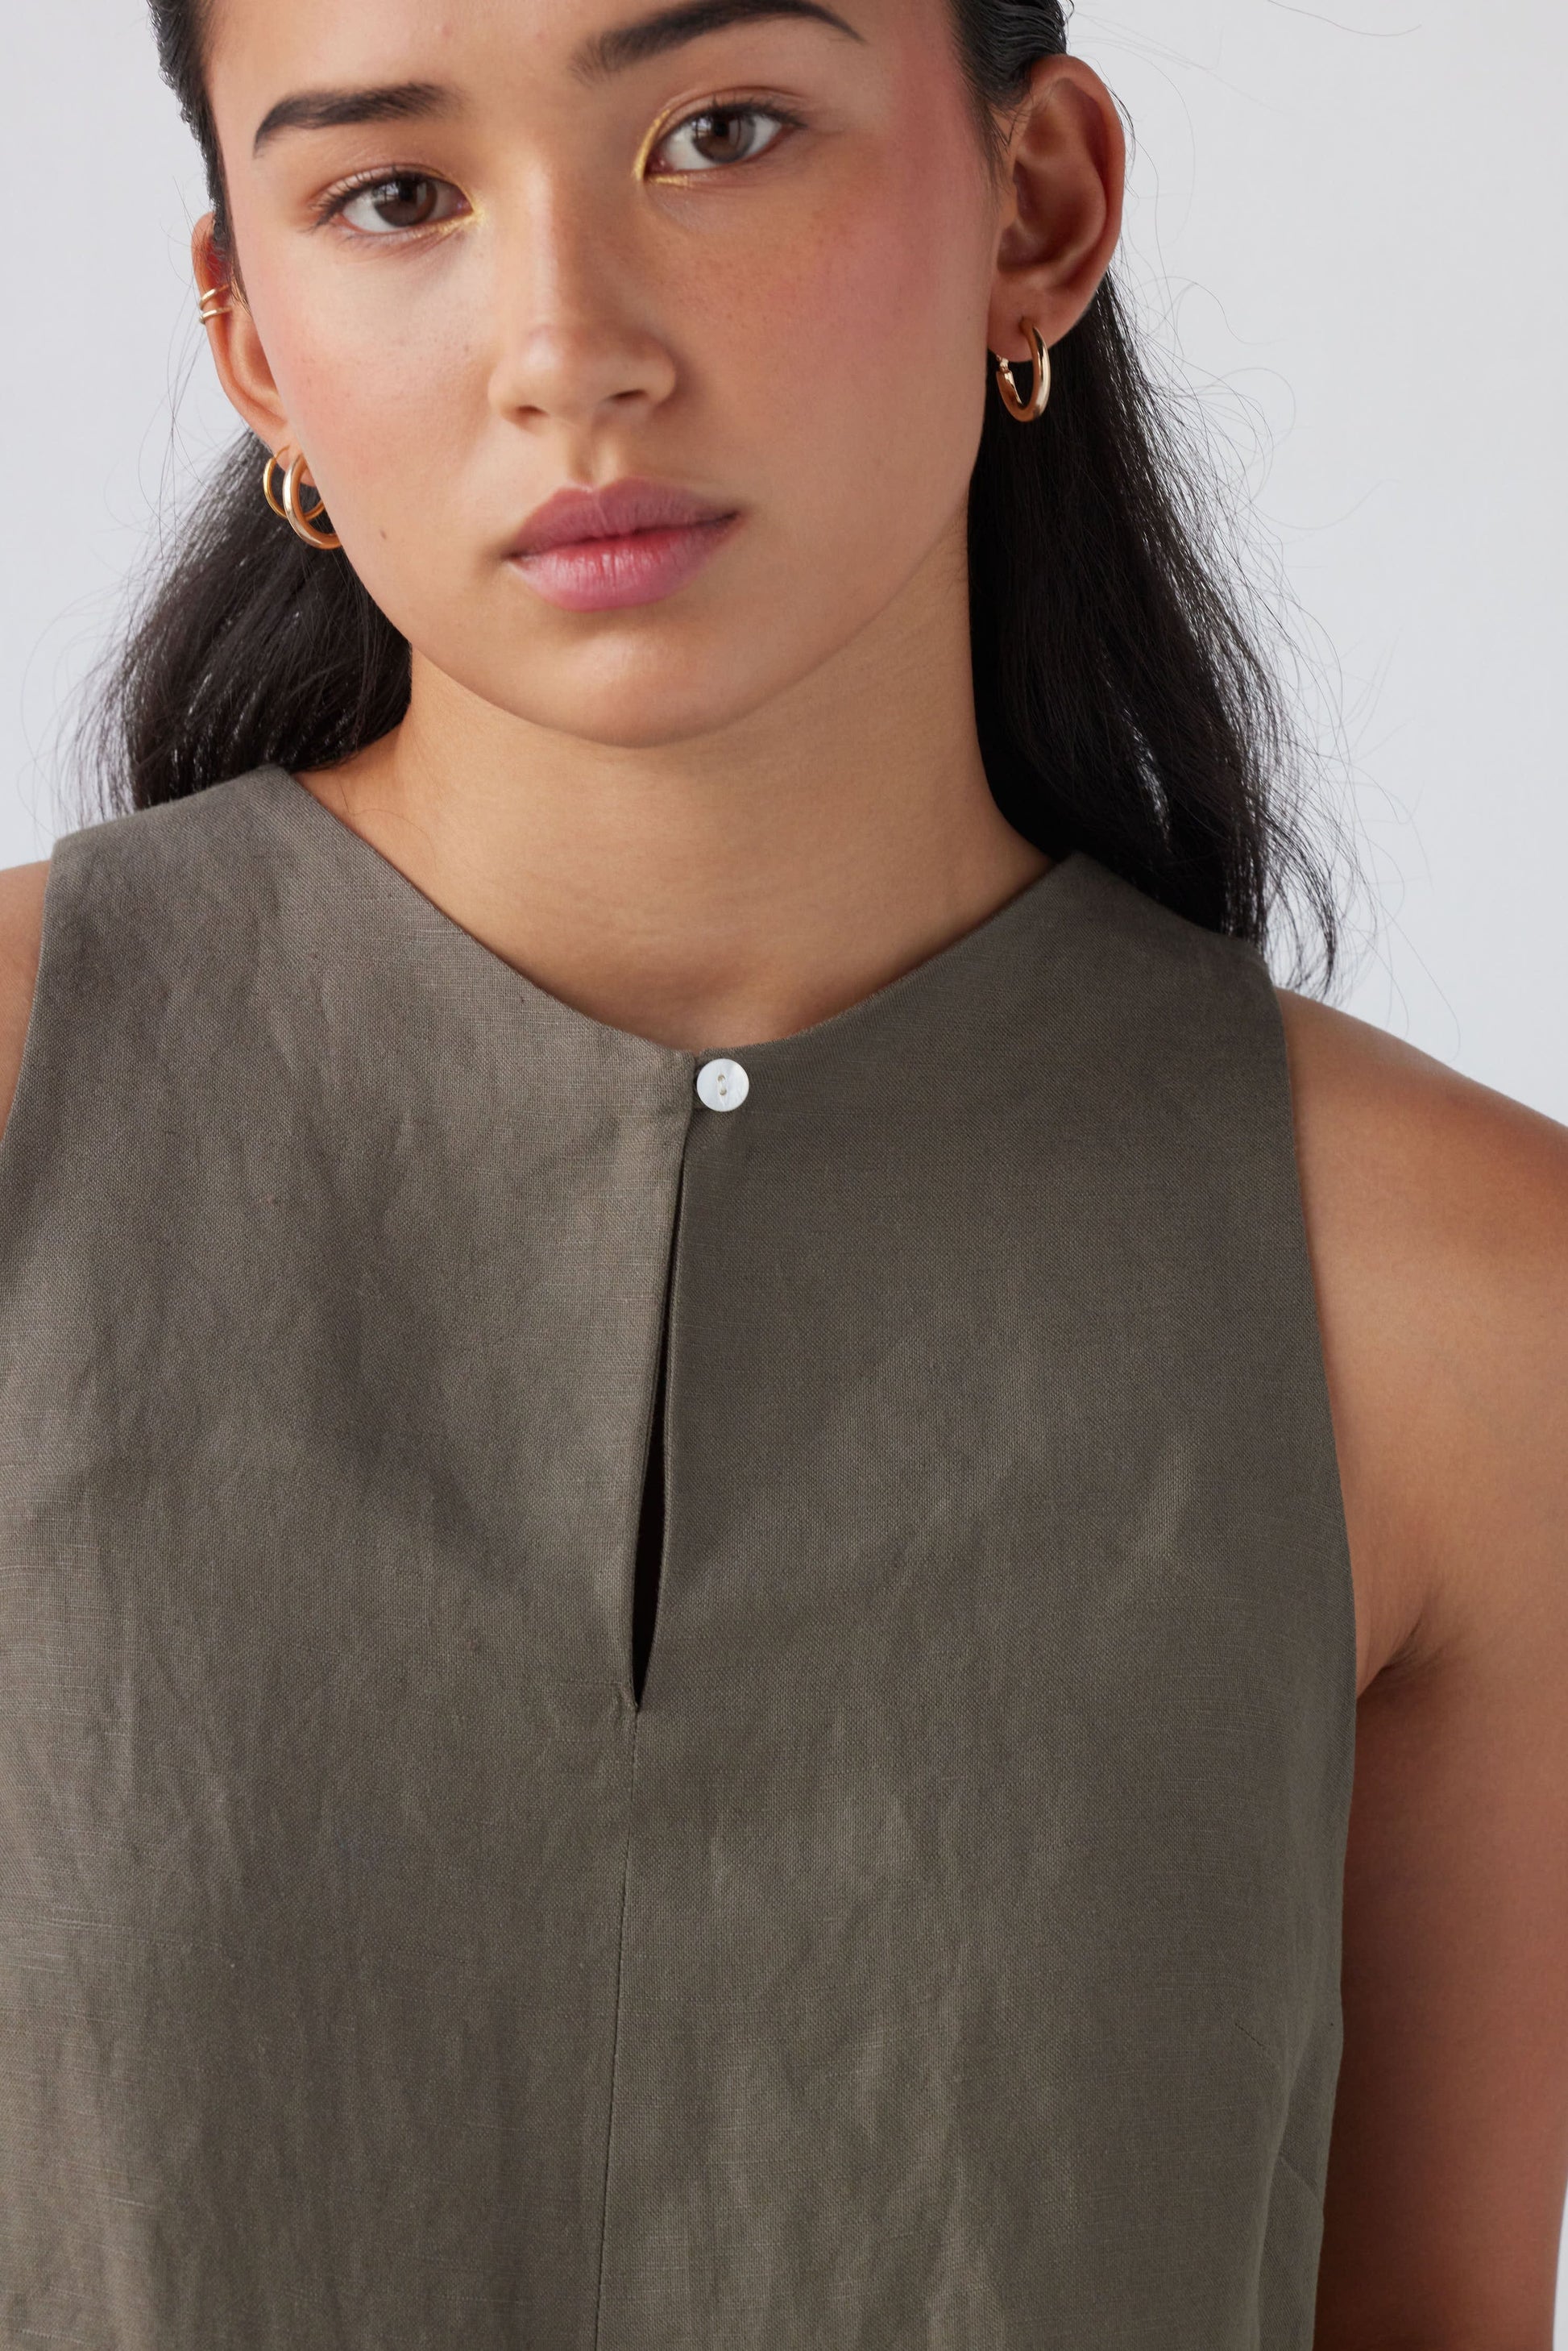 Ina Tank in Linen Blend Tops CHRISTINE ALCALAY   